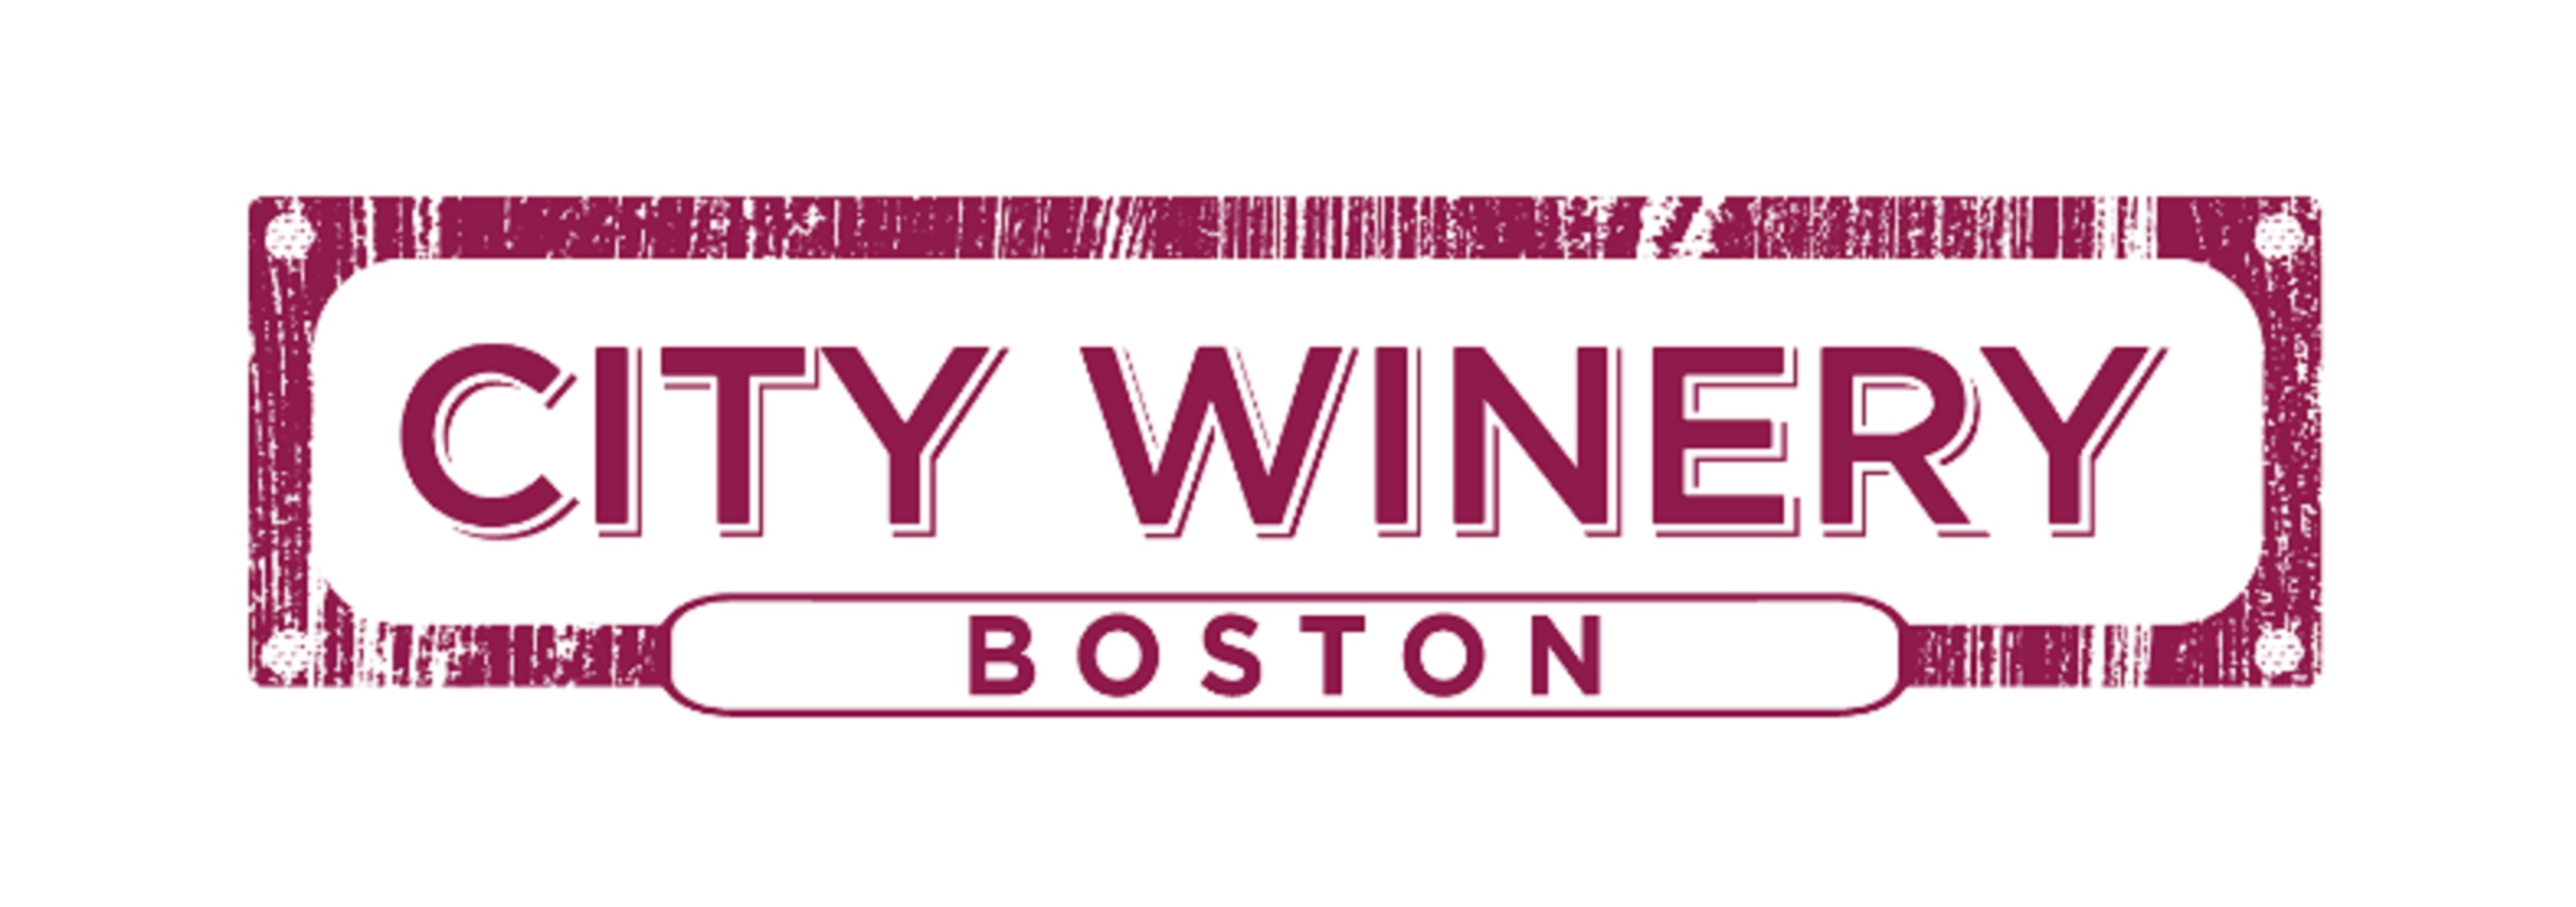 CITY WINERY BOSTON PROMISES TO DELIVER AN EXTRAORDINARY RANGE OF MUSIC